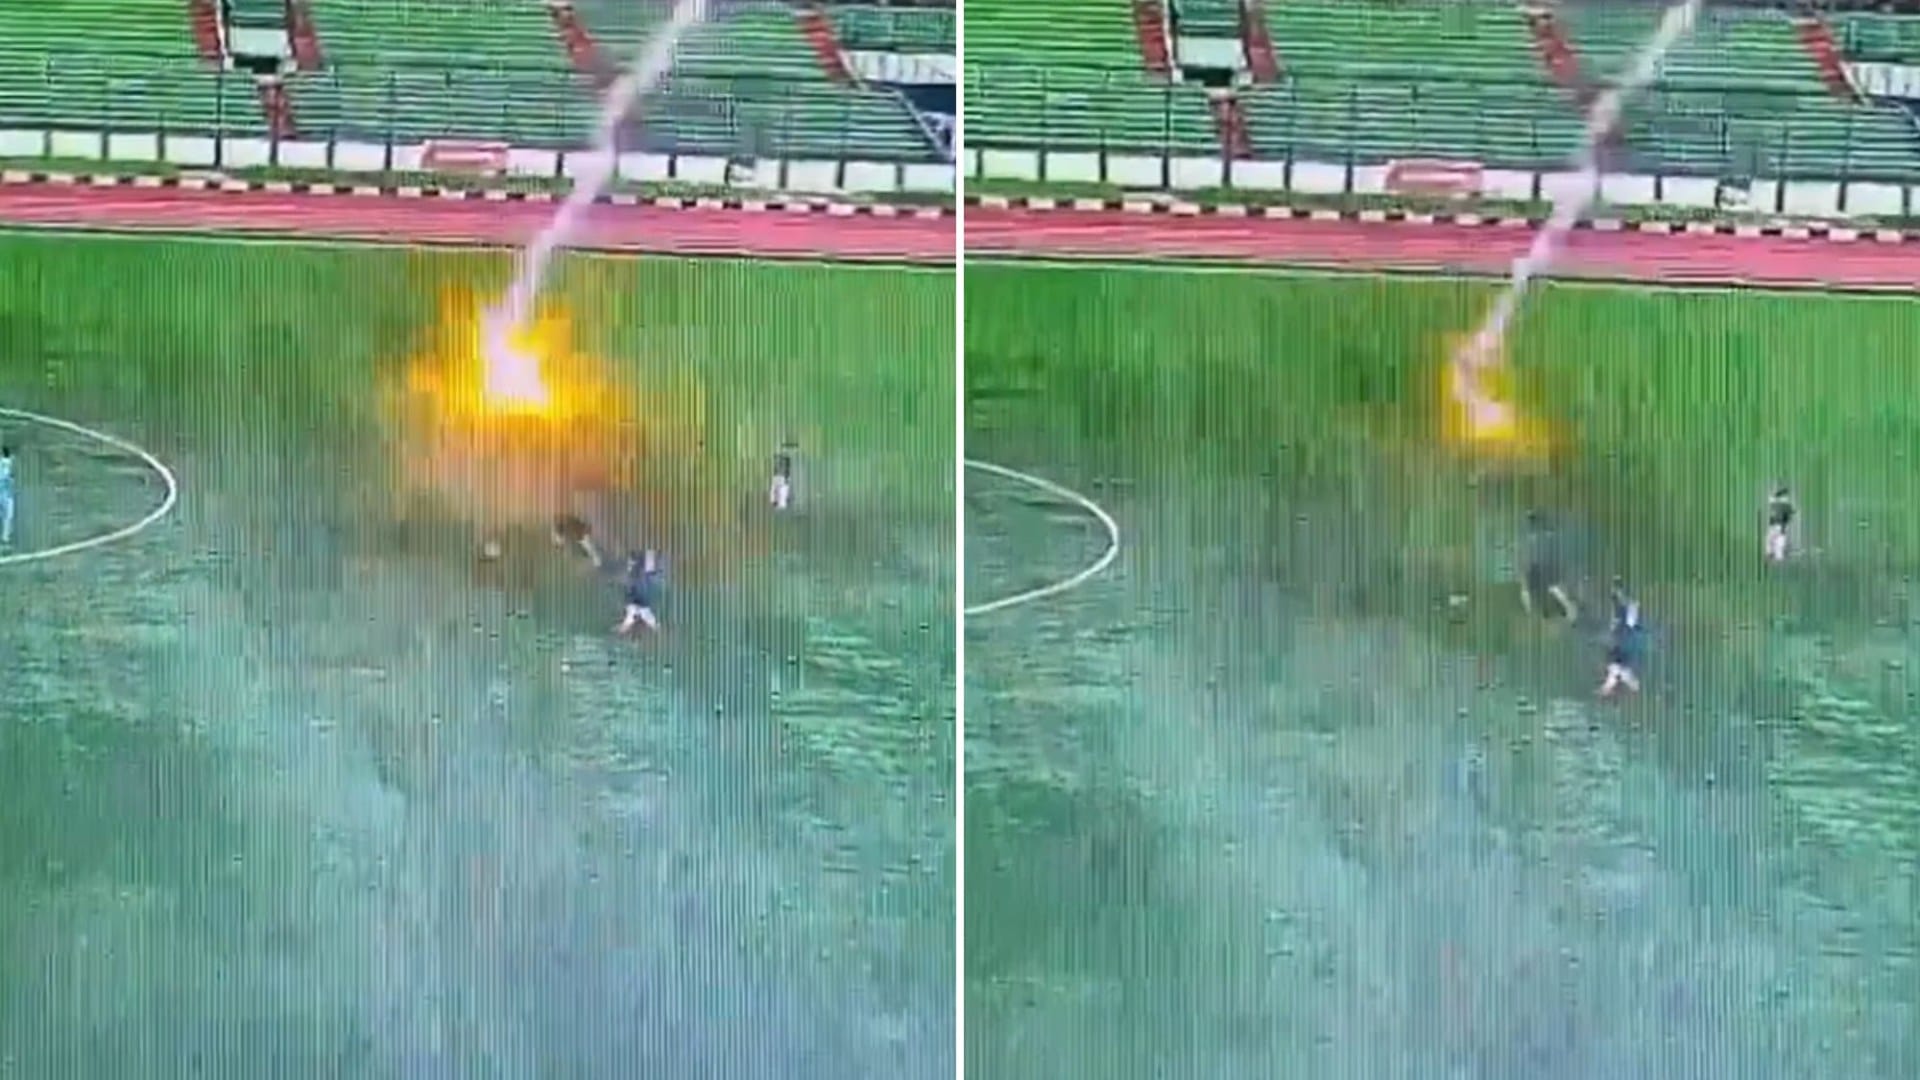 Sickening moment footballer is struck by lightning and killed in the middle of a match in front of horrified fans